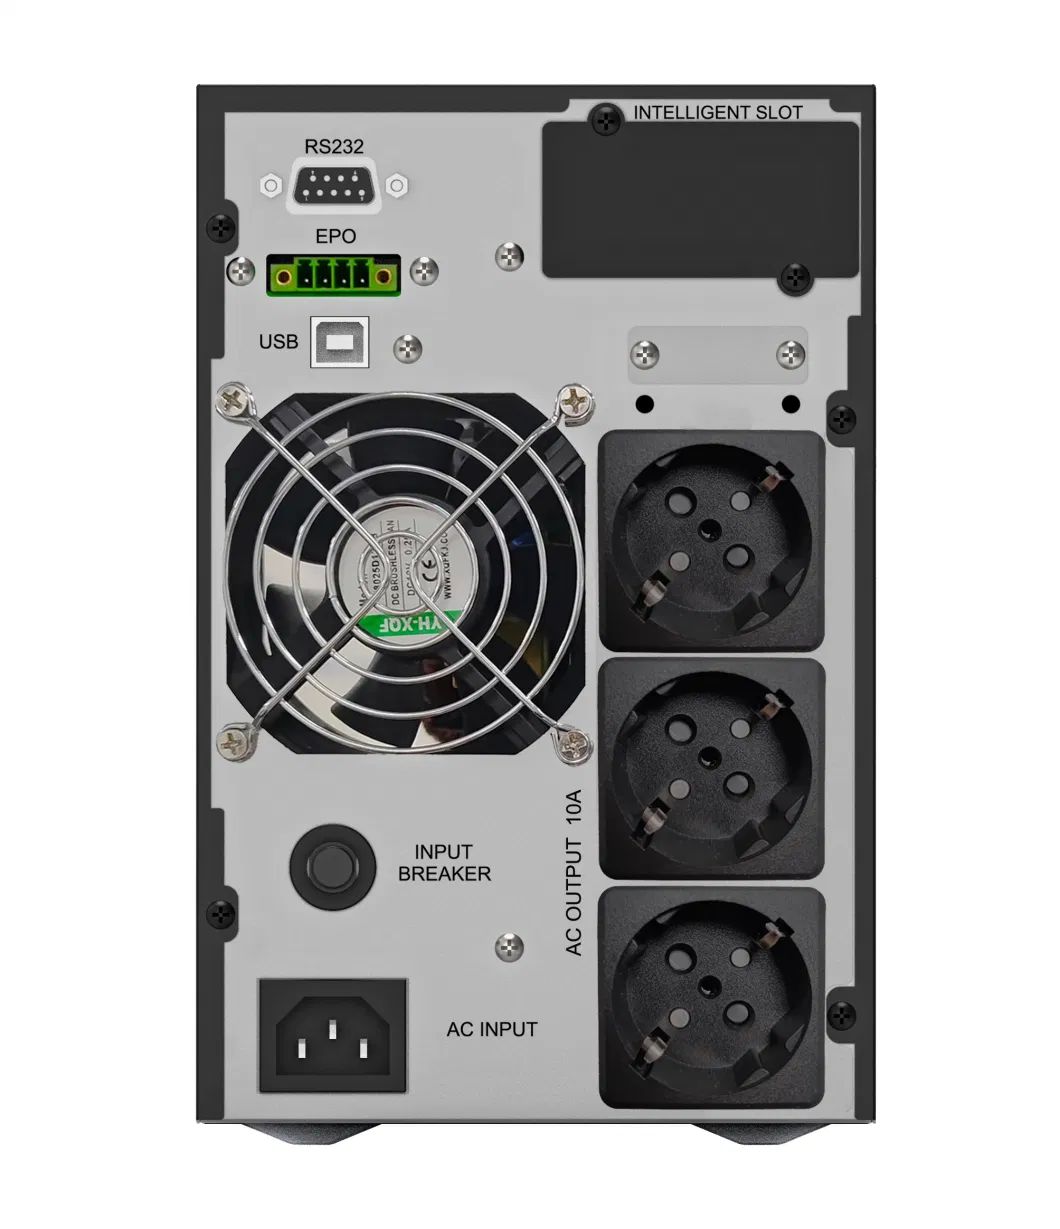 1kVA 2kVA 3kVA 6kVA 10kVA 1 Phase or 3 Phase Online UPS Uninterrupted Power Supply for Computers/Servers/Data Rooms/Socomec UPS Spare Part